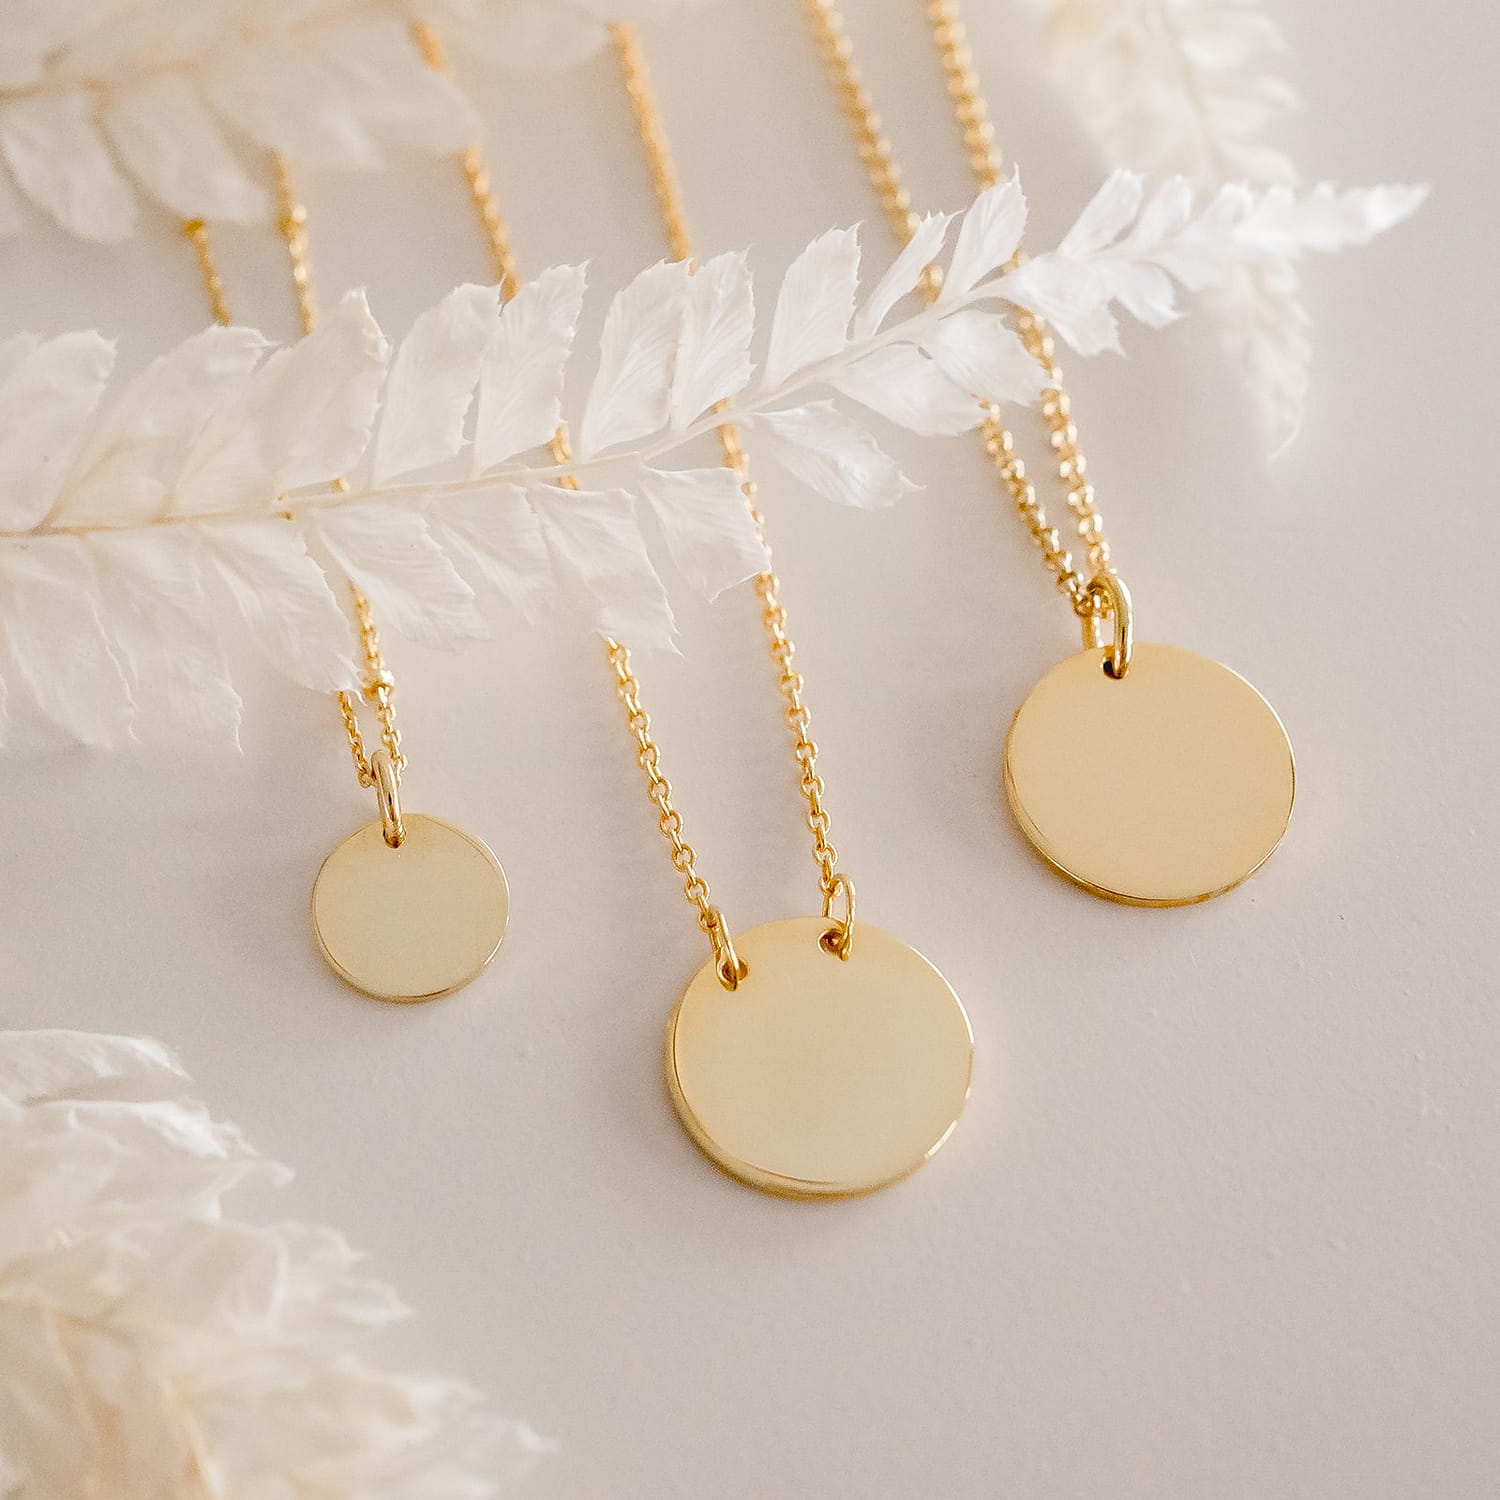 3 styles of yellow gold disc necklaces engraved